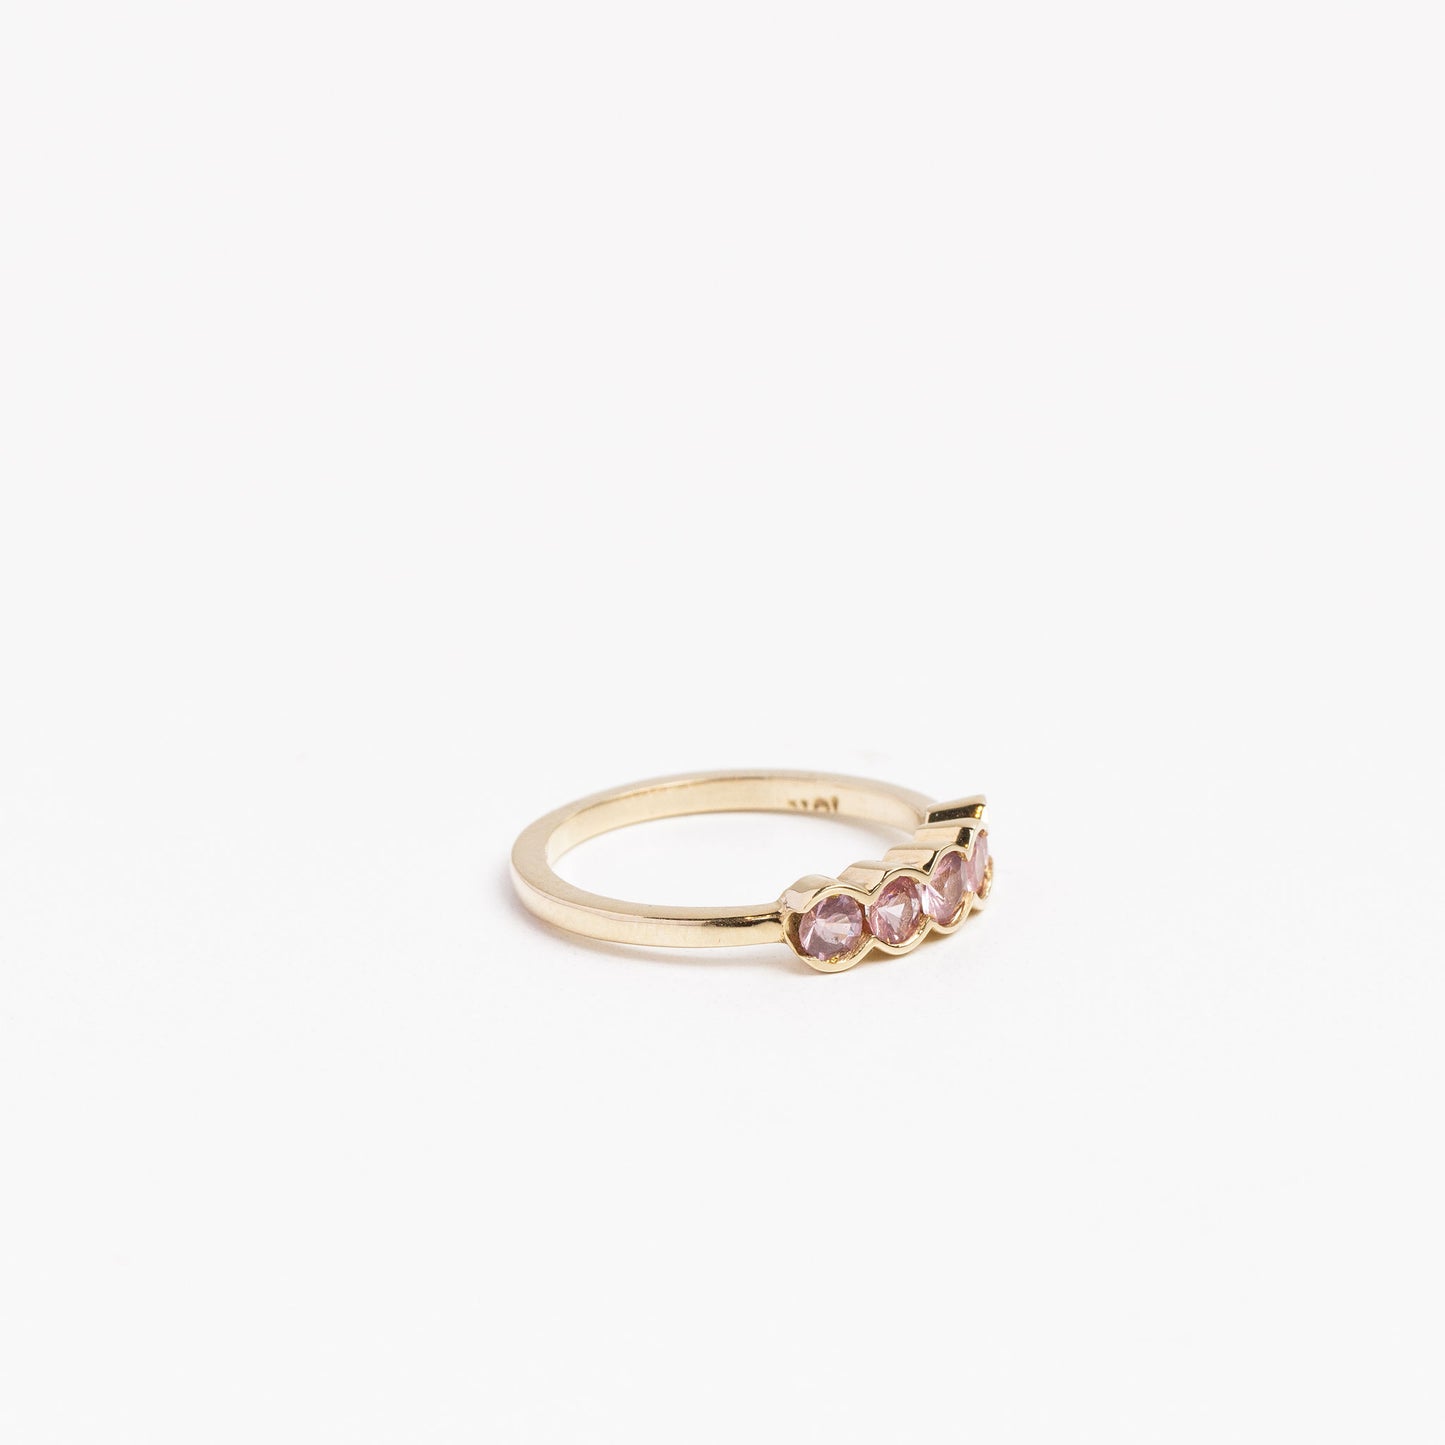 side view of the pink spinel 5 gemstone ring on a white background